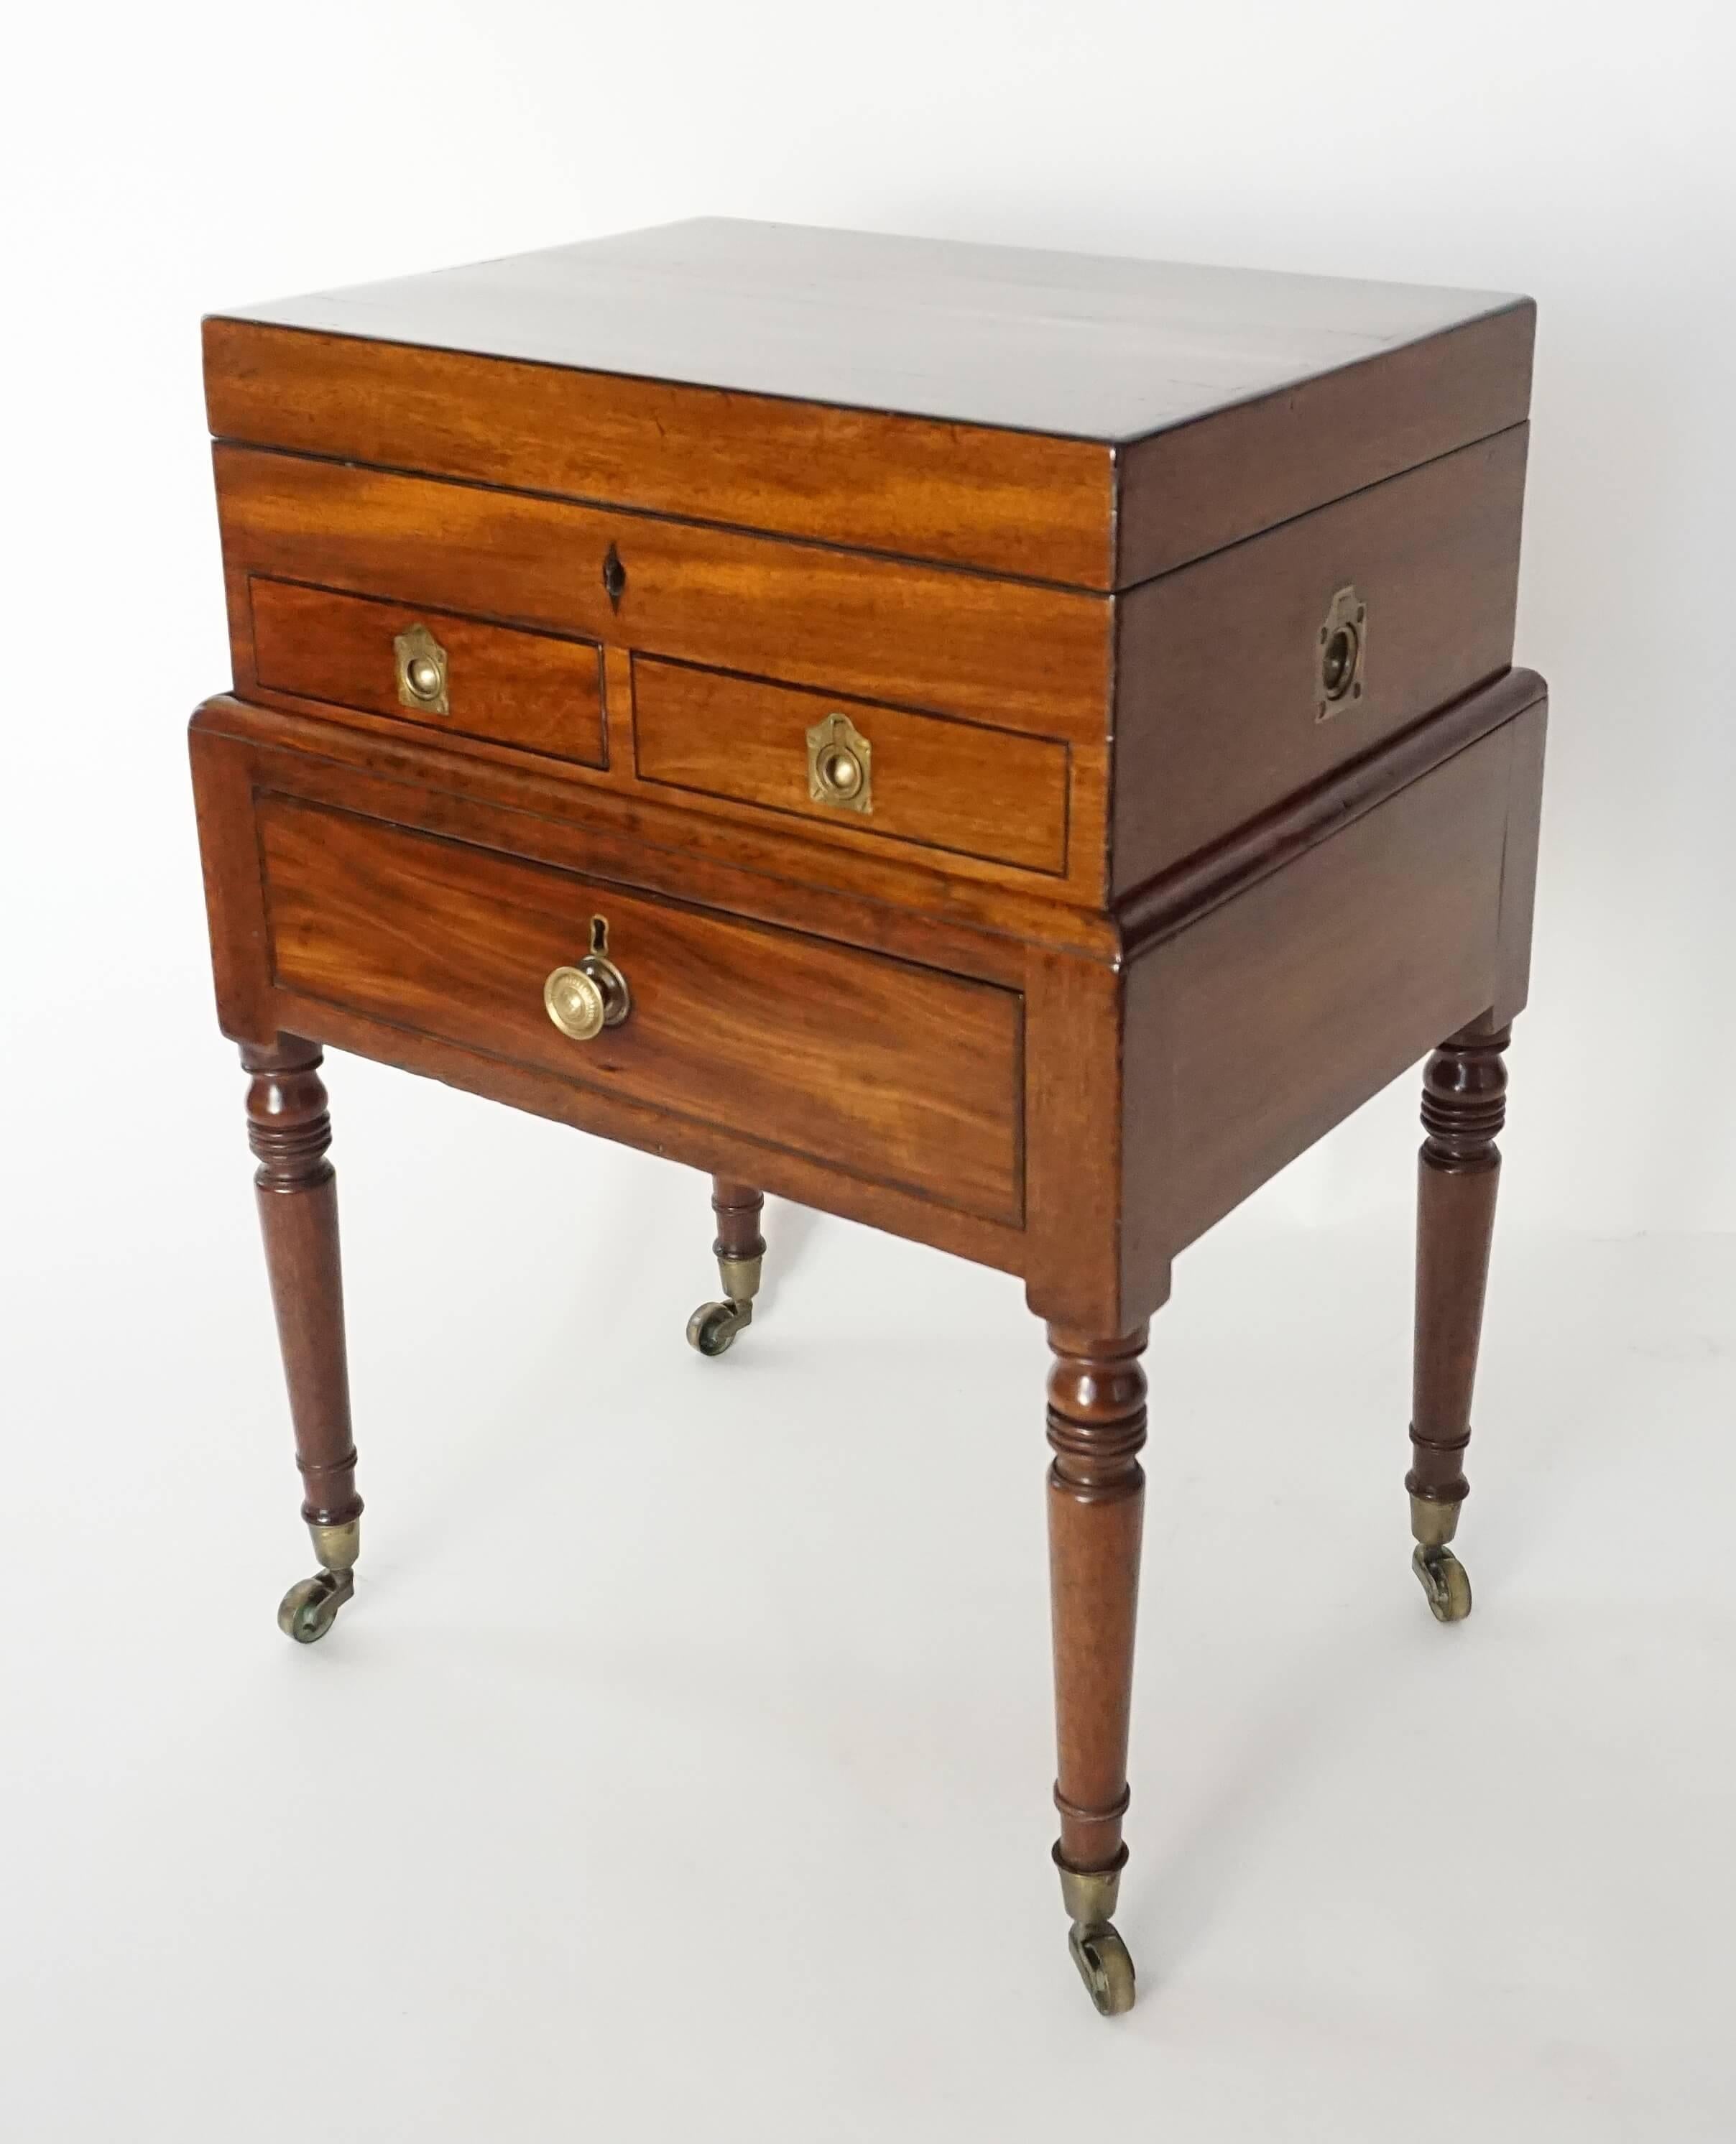 19th Century English Regency Campaign Chest on Stand, circa 1820